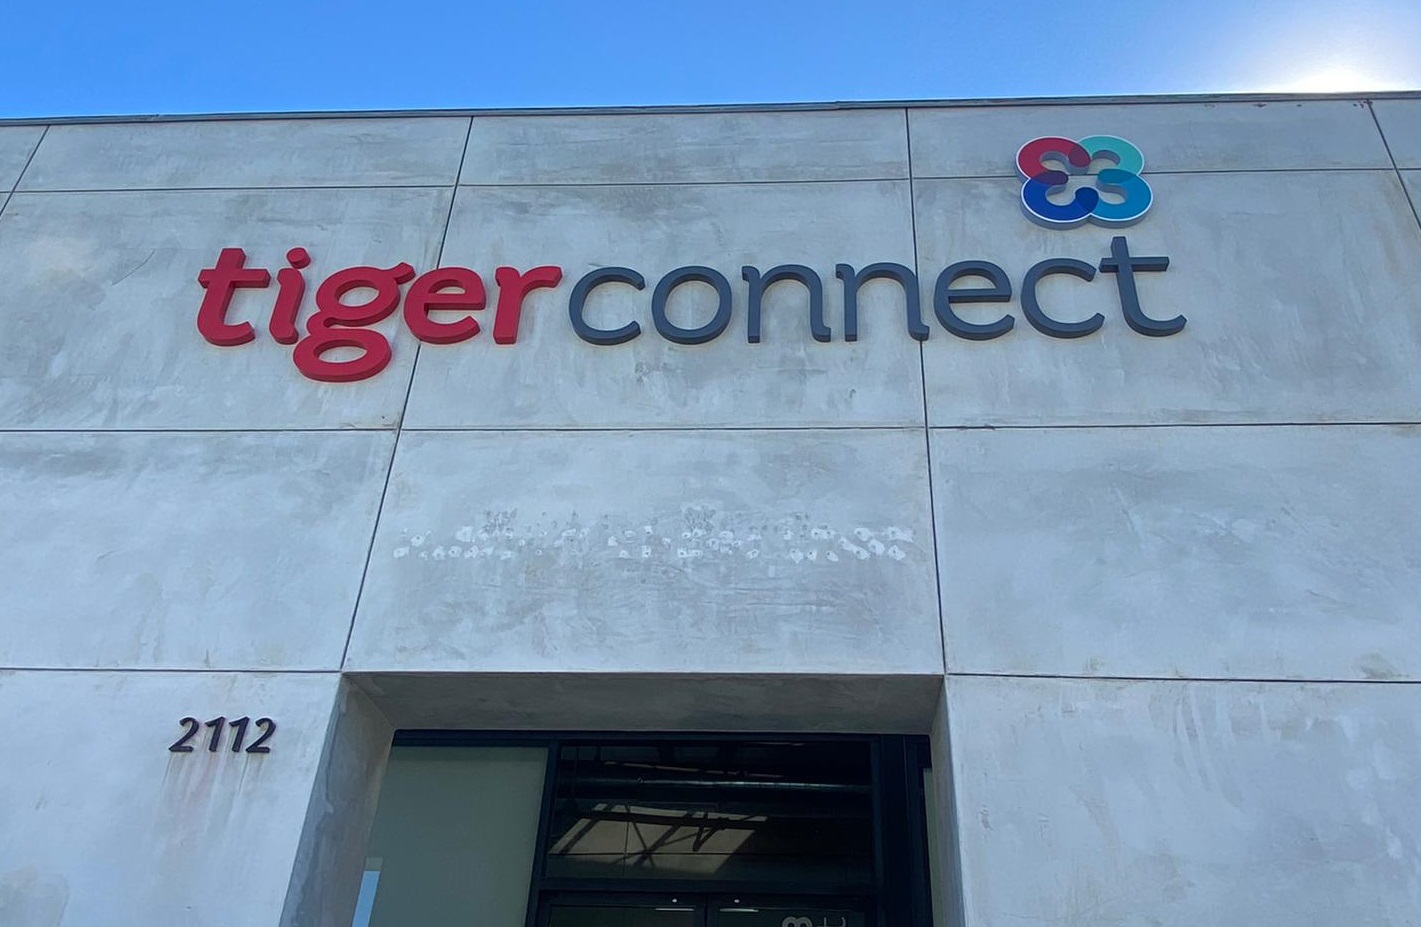 You are currently viewing Building Dimensional Letter Sign for Tiger Connect in Santa Monica